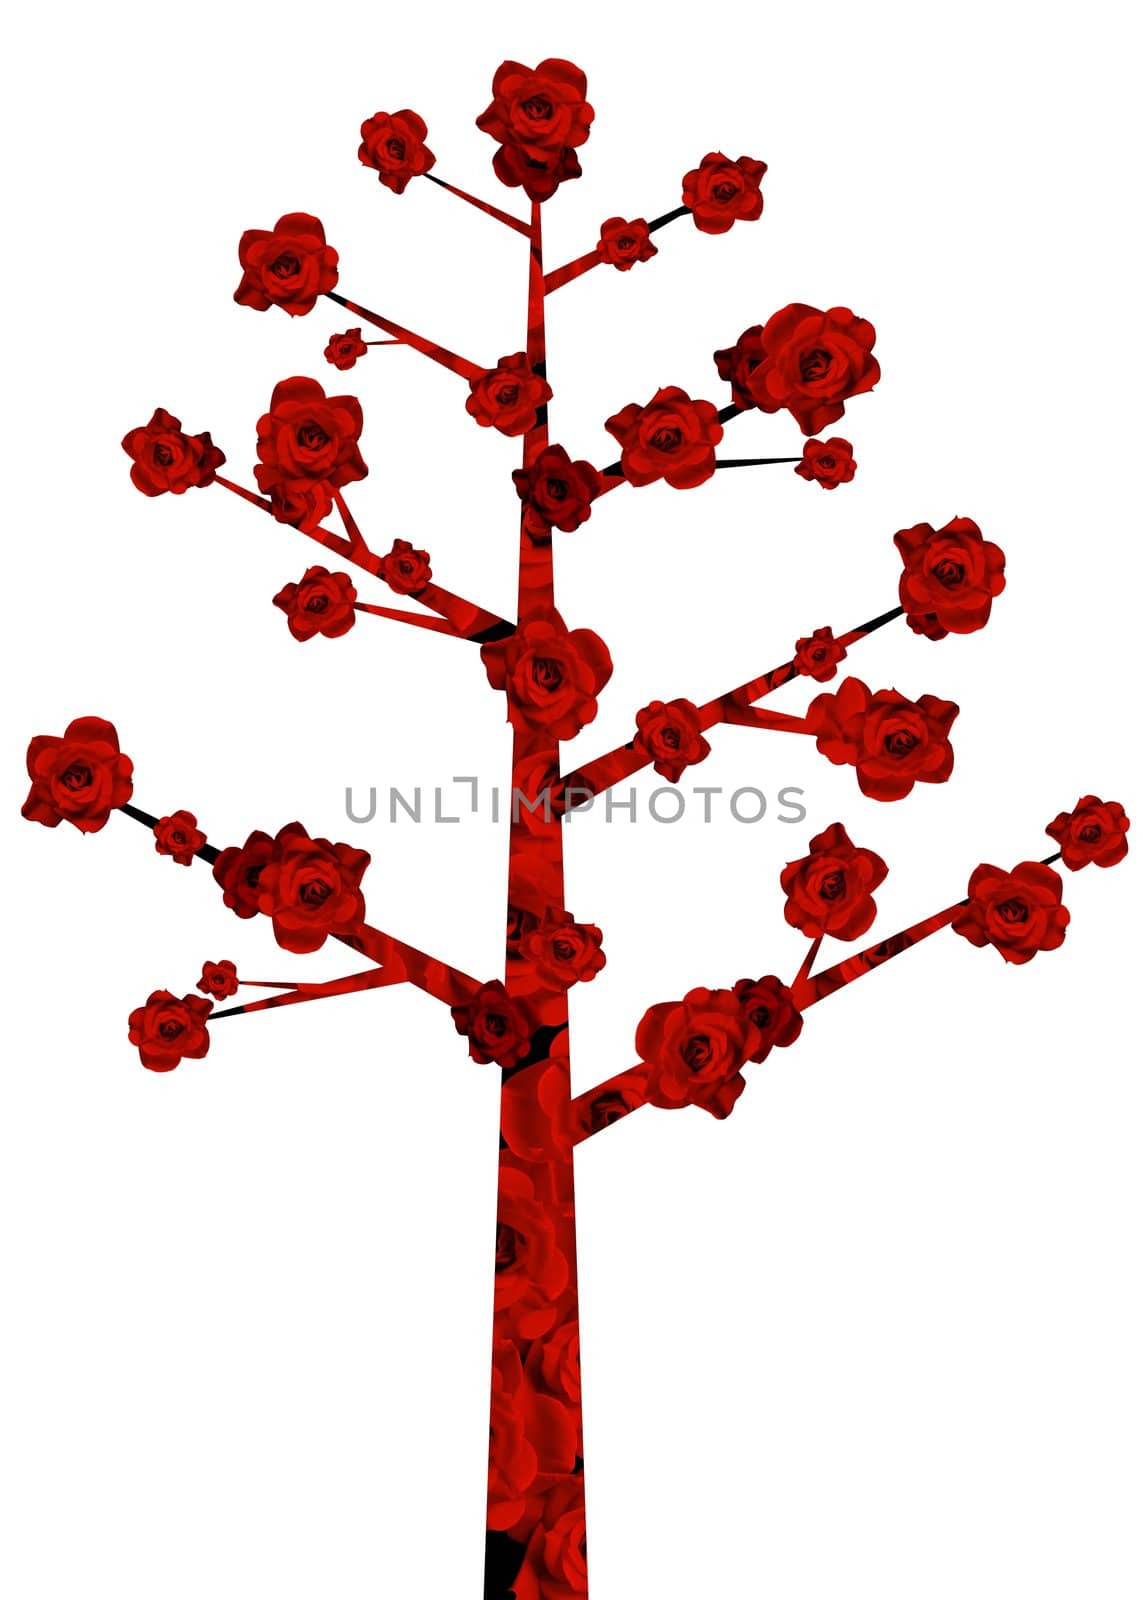 illustrated tree made of red flowers